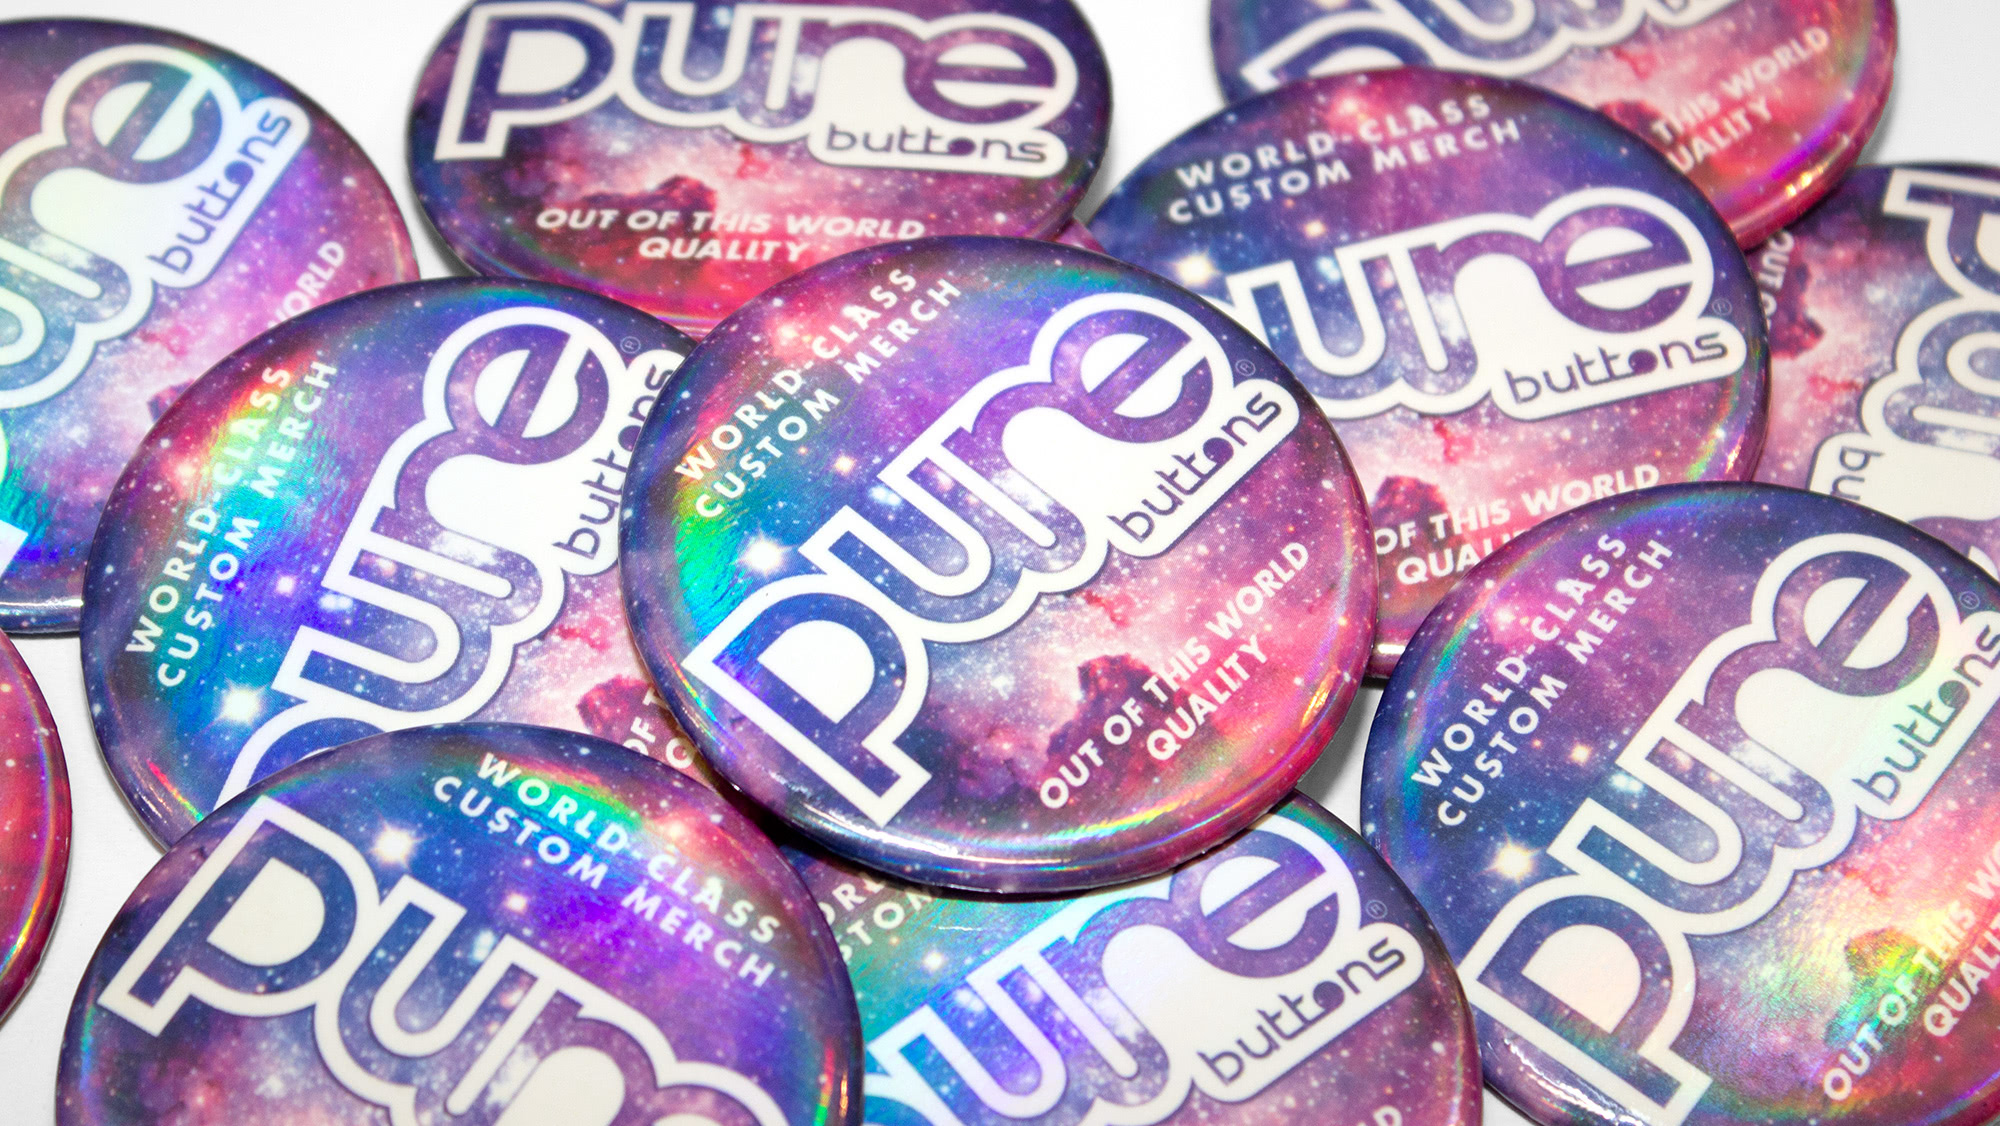 Custom magnets with rainbow gloss finish featuring Pure Buttons logo.